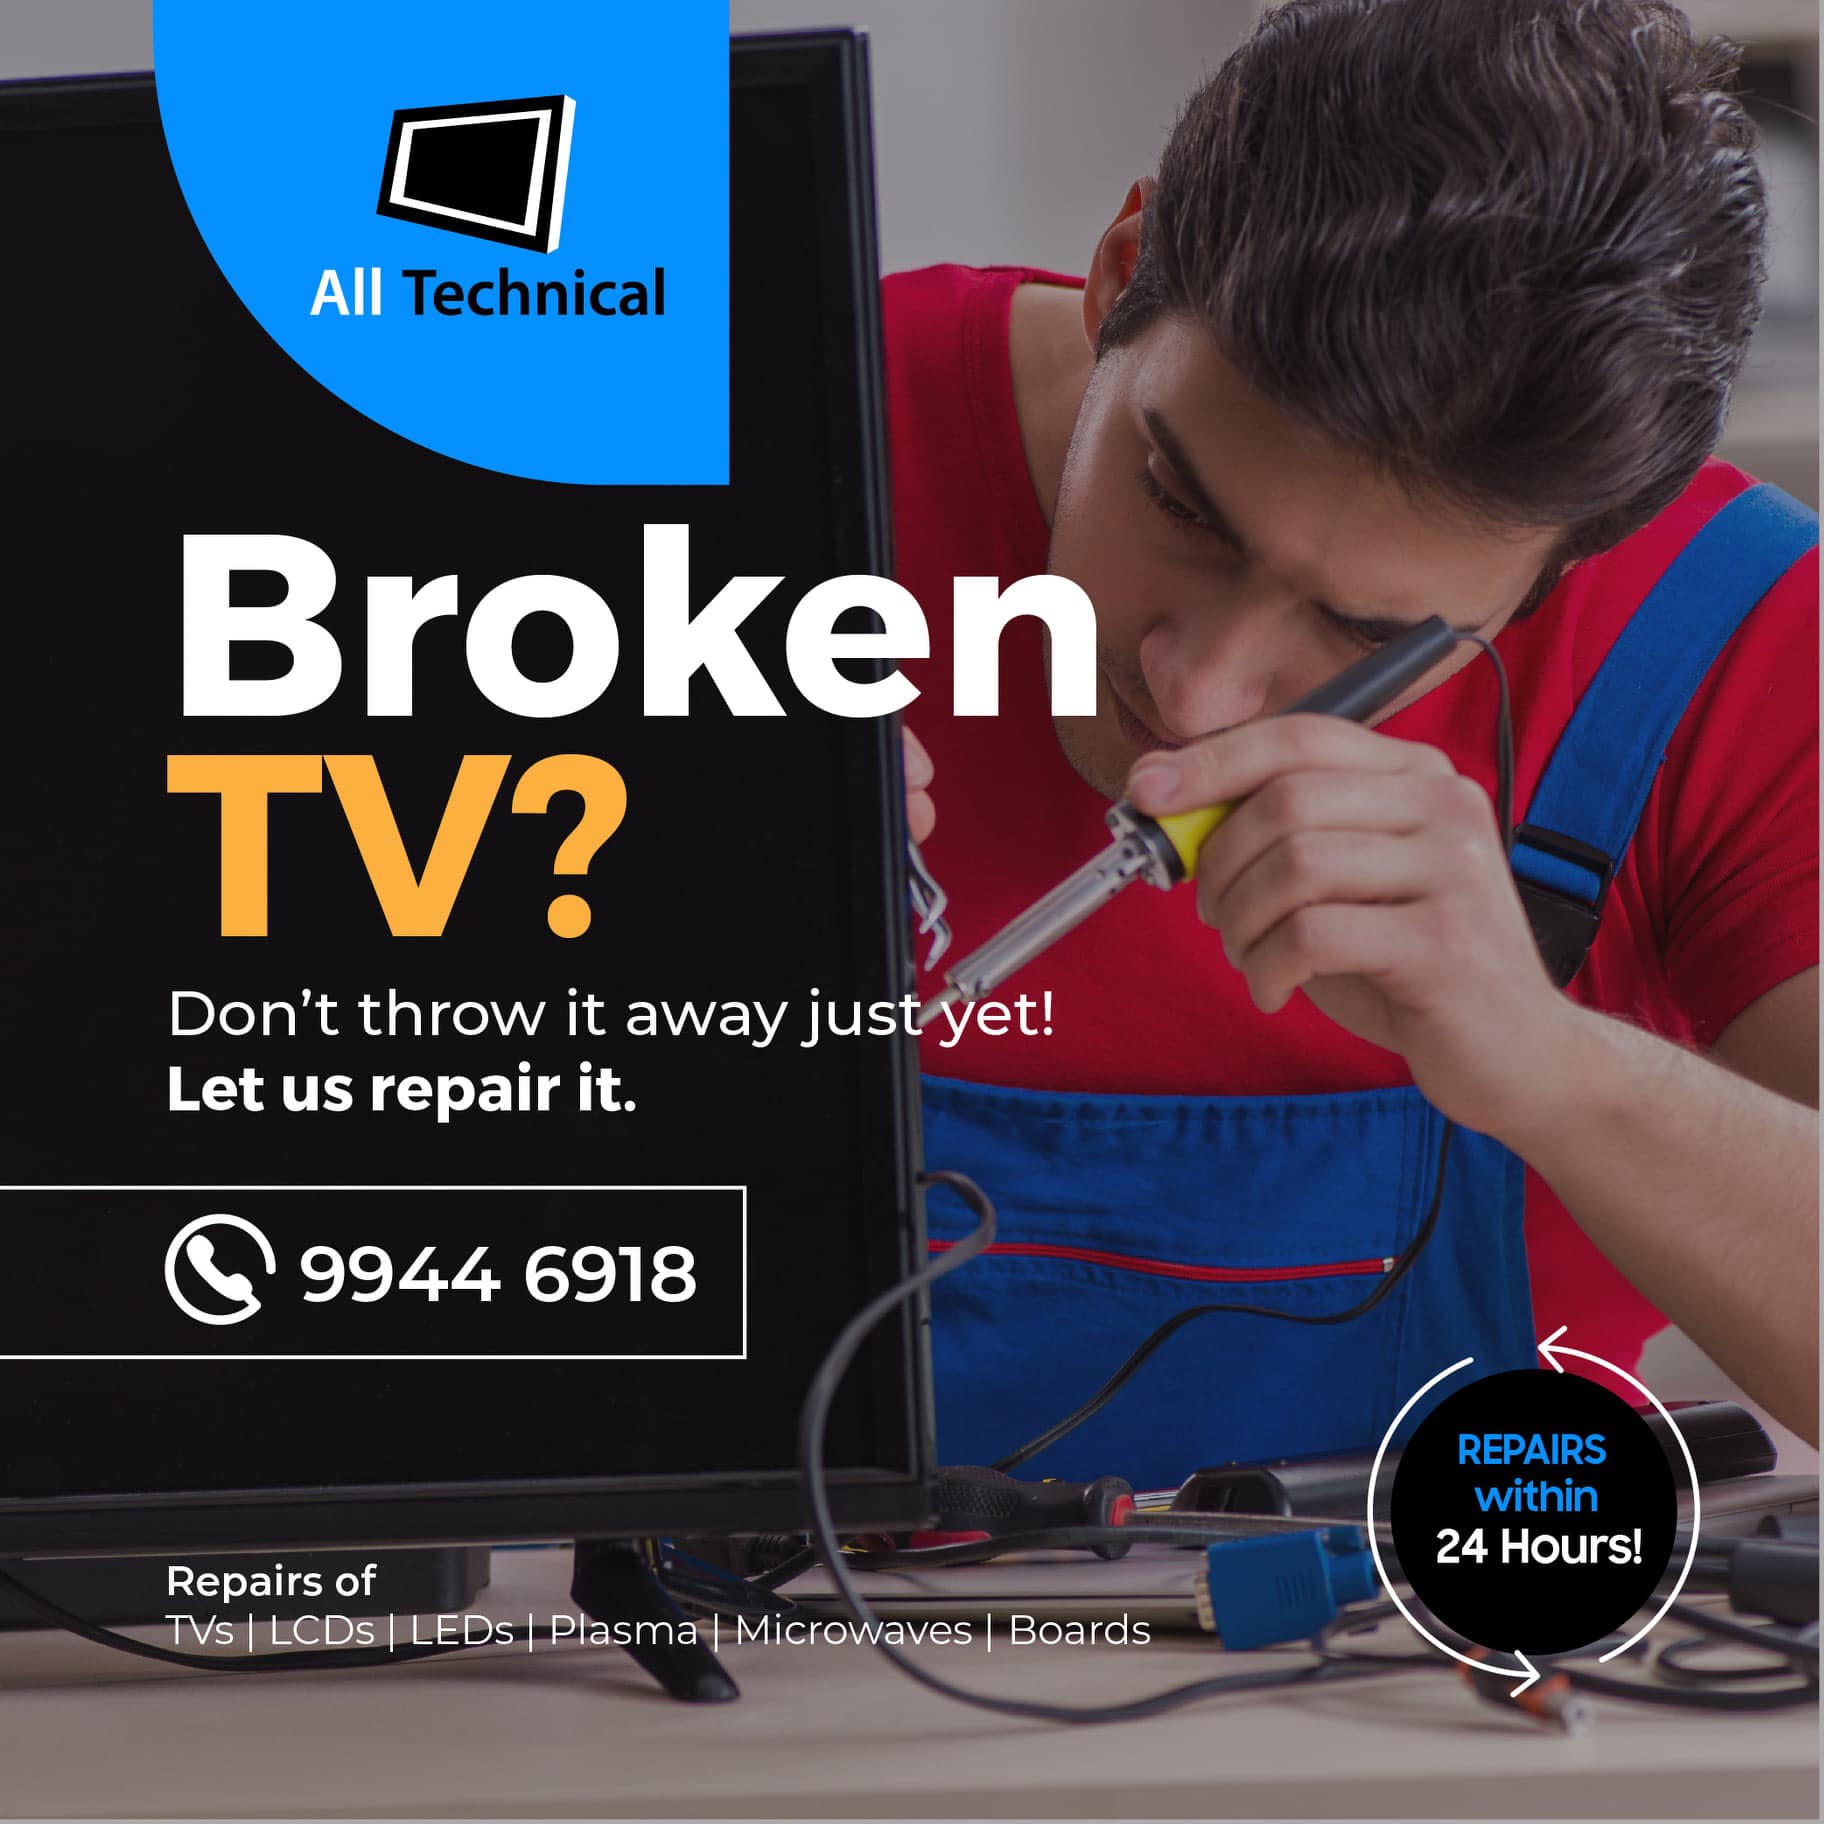 All Technical - Television Service & Repairs